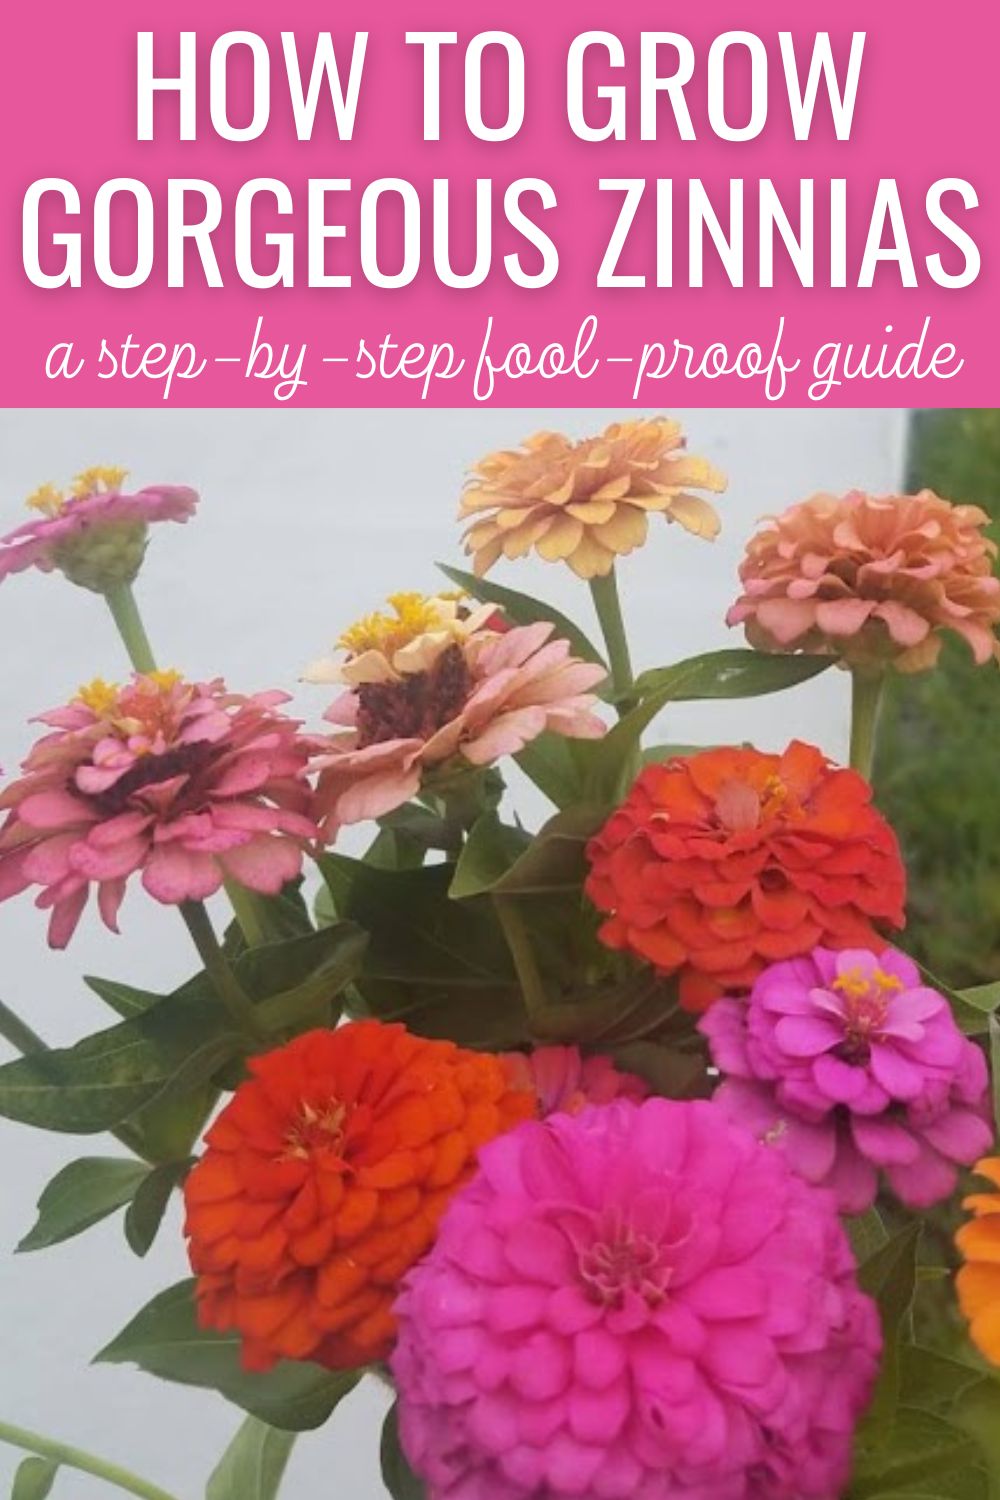 how to grow gorgeous zinnias, a step-by-step, fool-proof guide. 